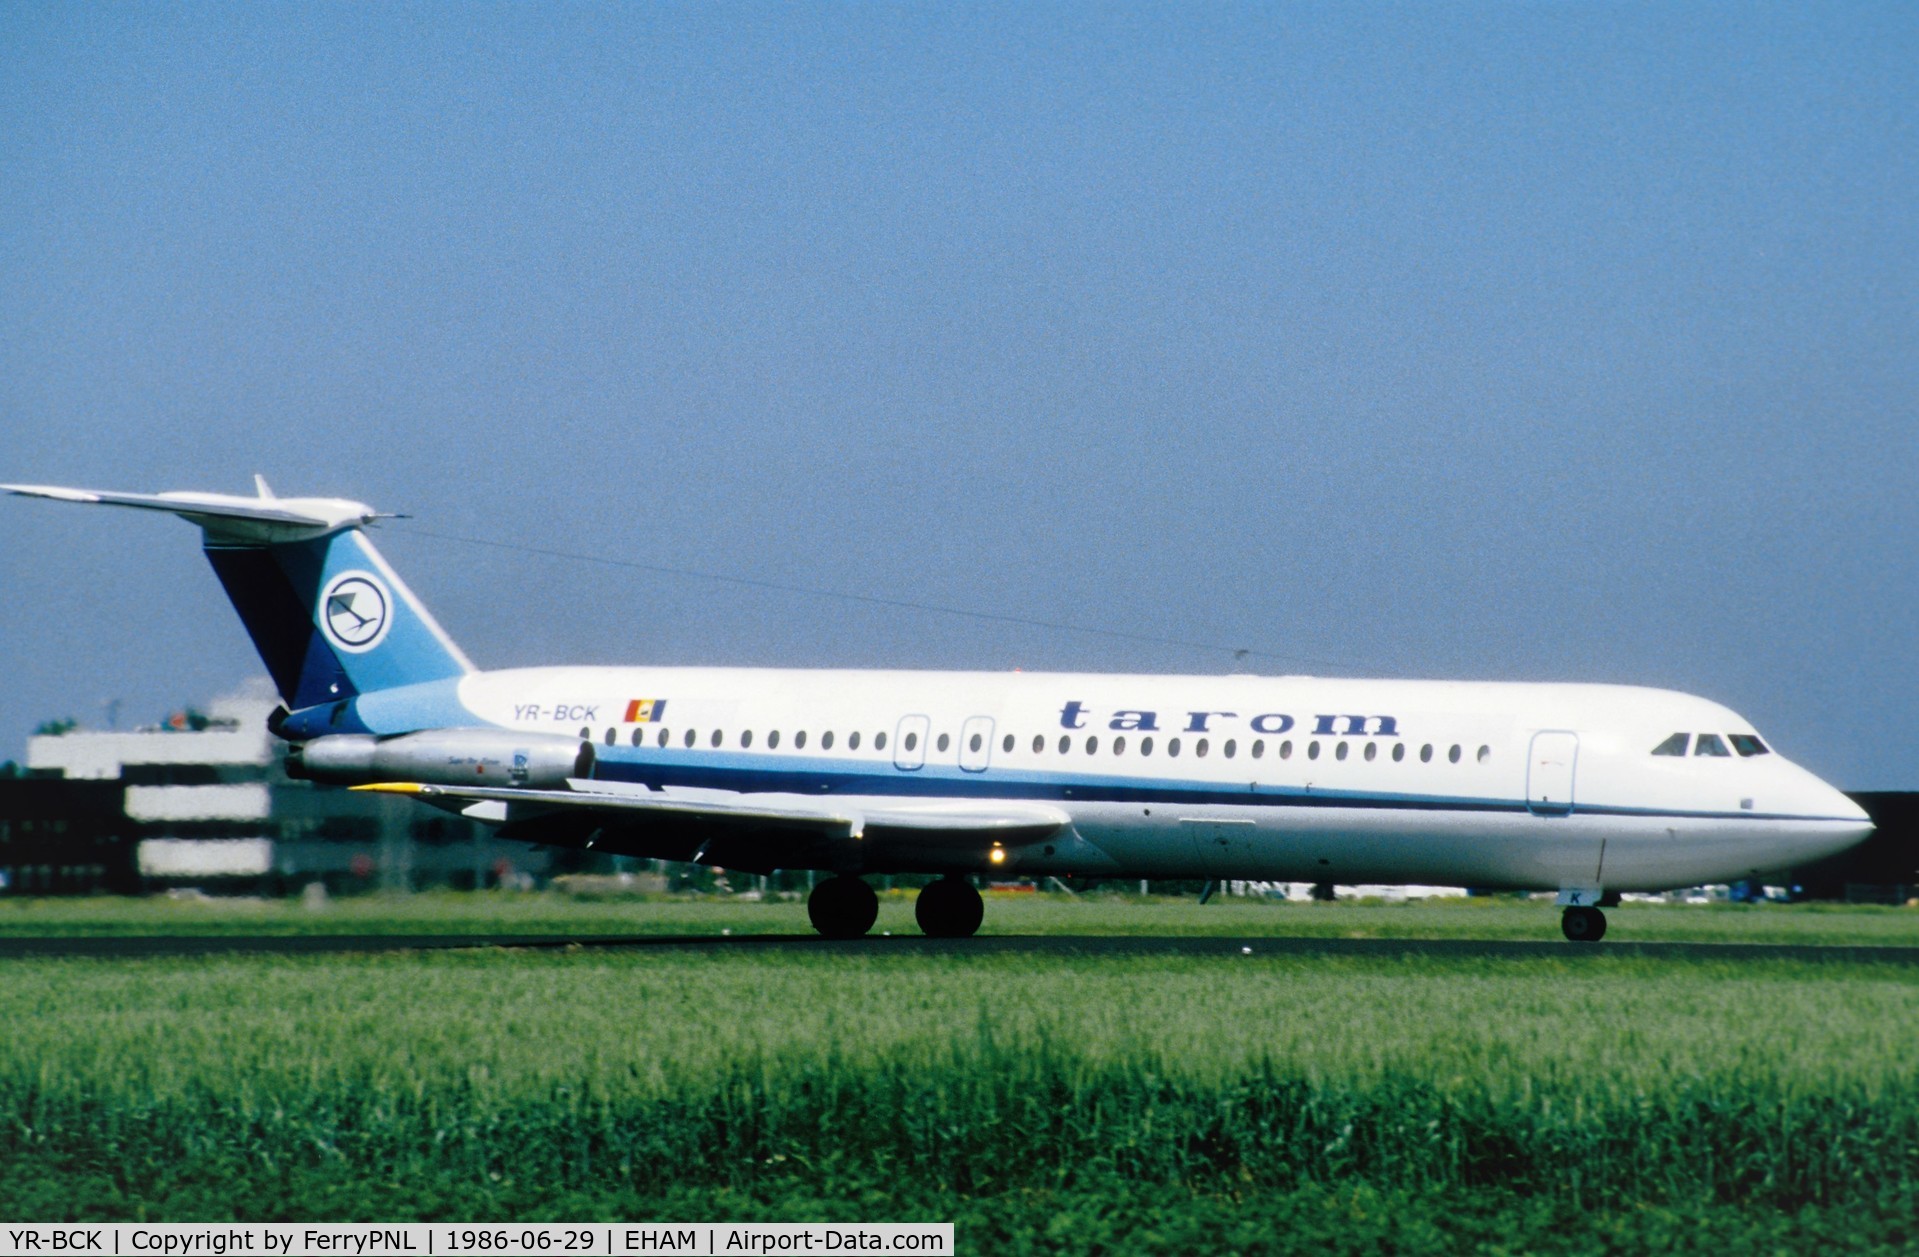 YR-BCK, 1977 BAC 111-525FT One-Eleven C/N BAC.254, Tarom BAC 1-11 in the colors of Marmara Airlines after previous lease.